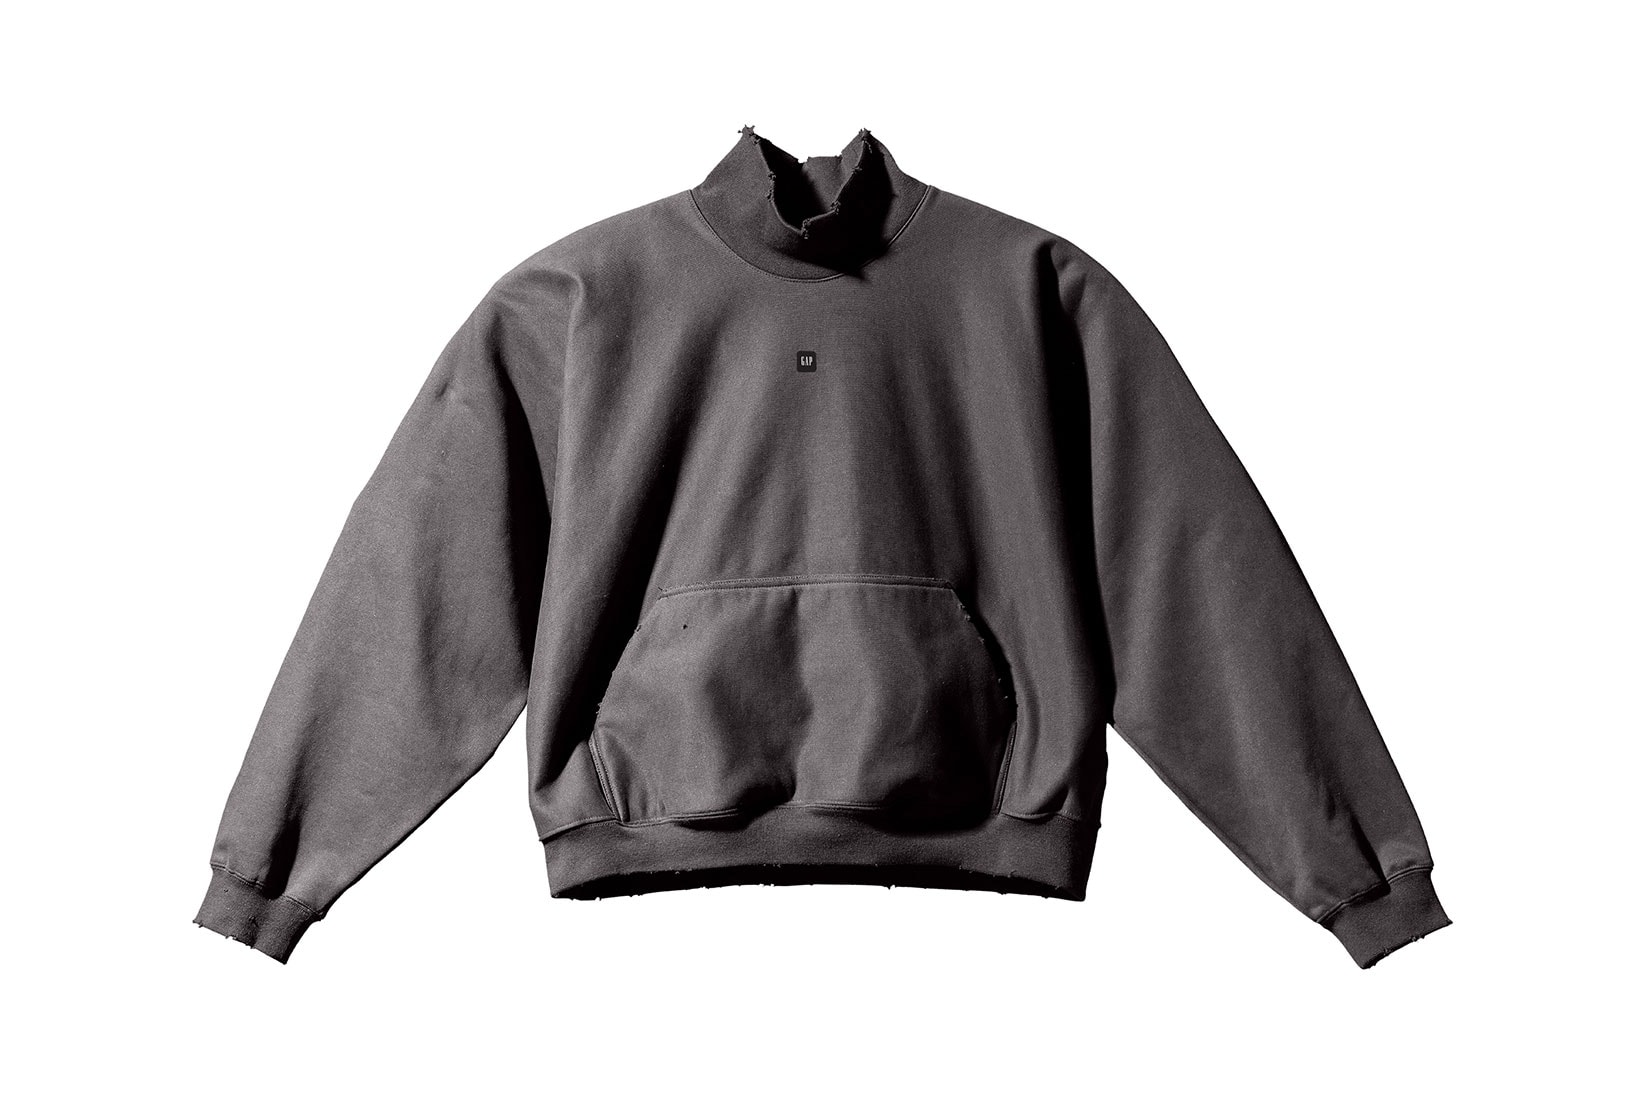 Yeezy Gap Engineered by Balenciaga Part 2 Full Collection Release Where to buy Info